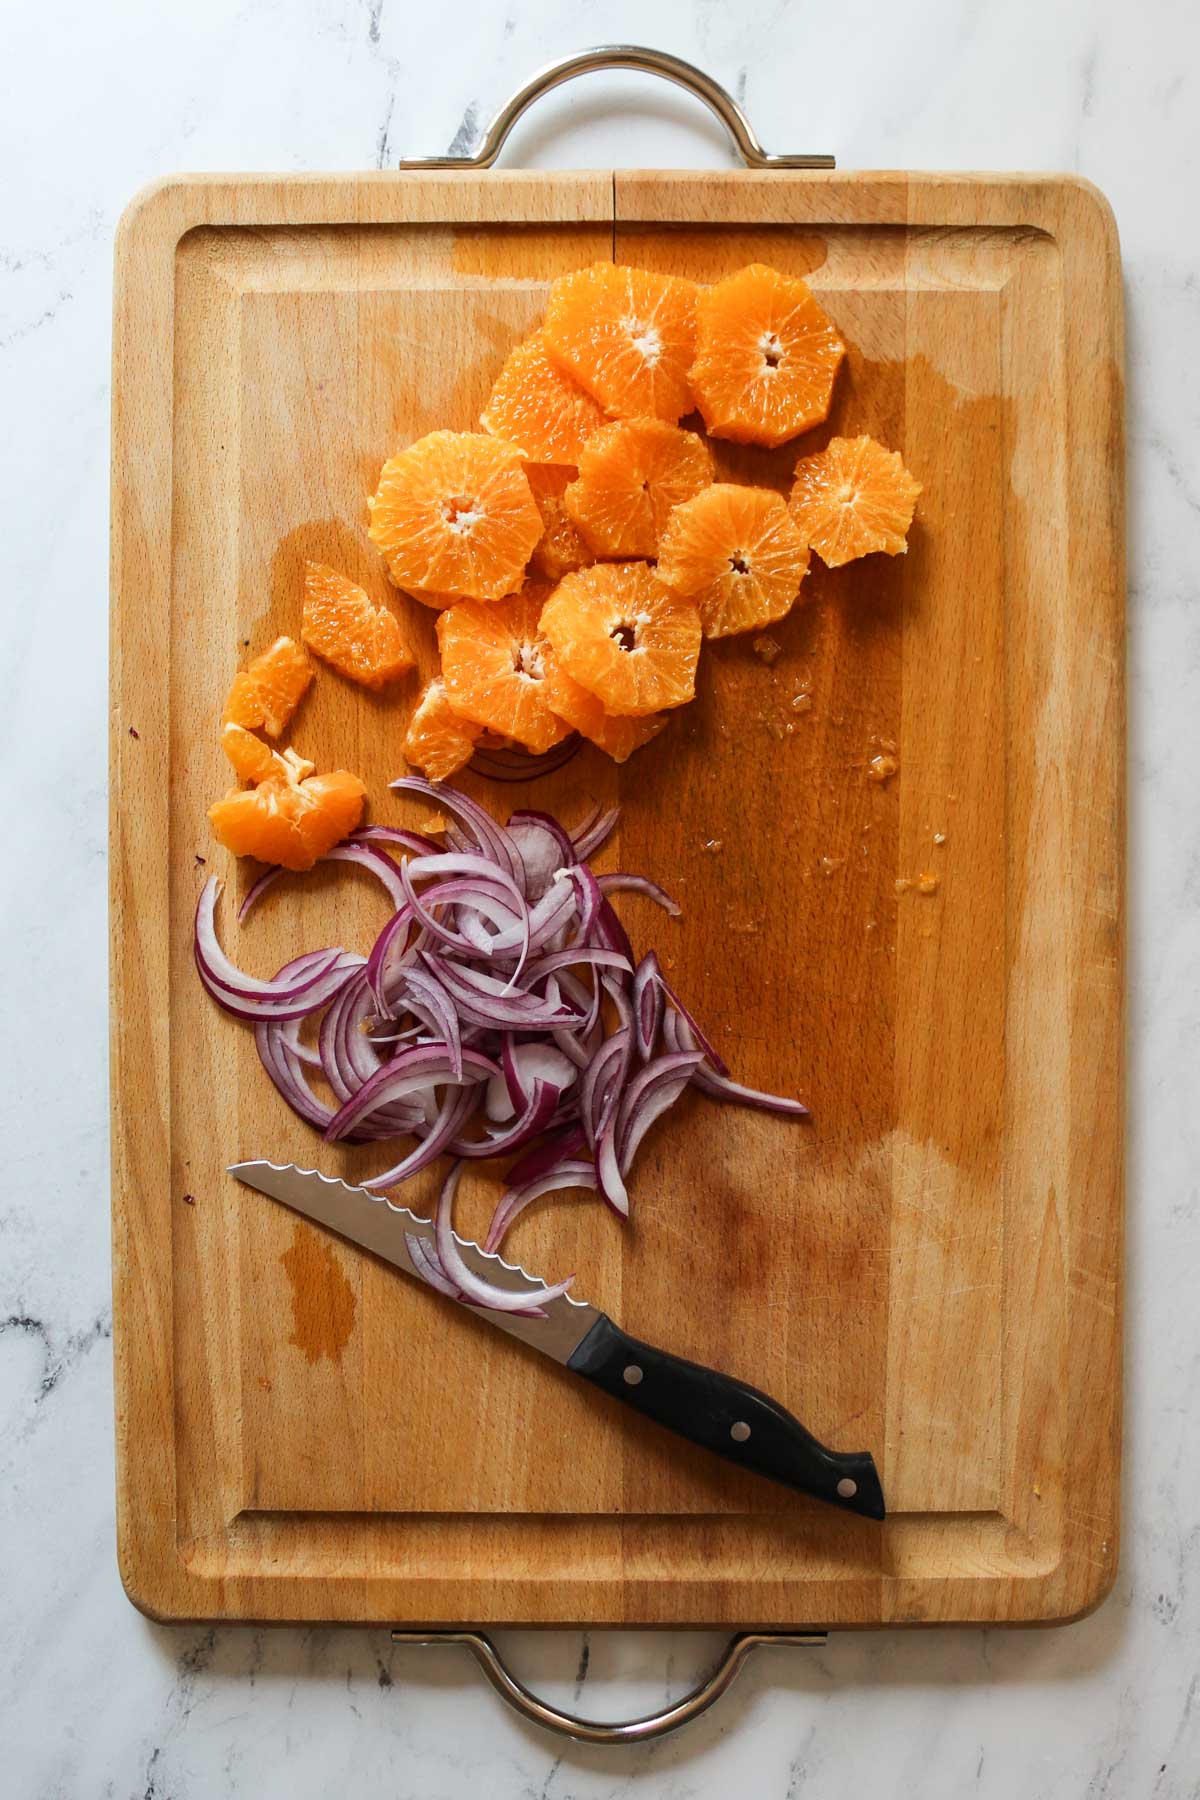 Sliced oranges and red onions on a cutting board with a knife